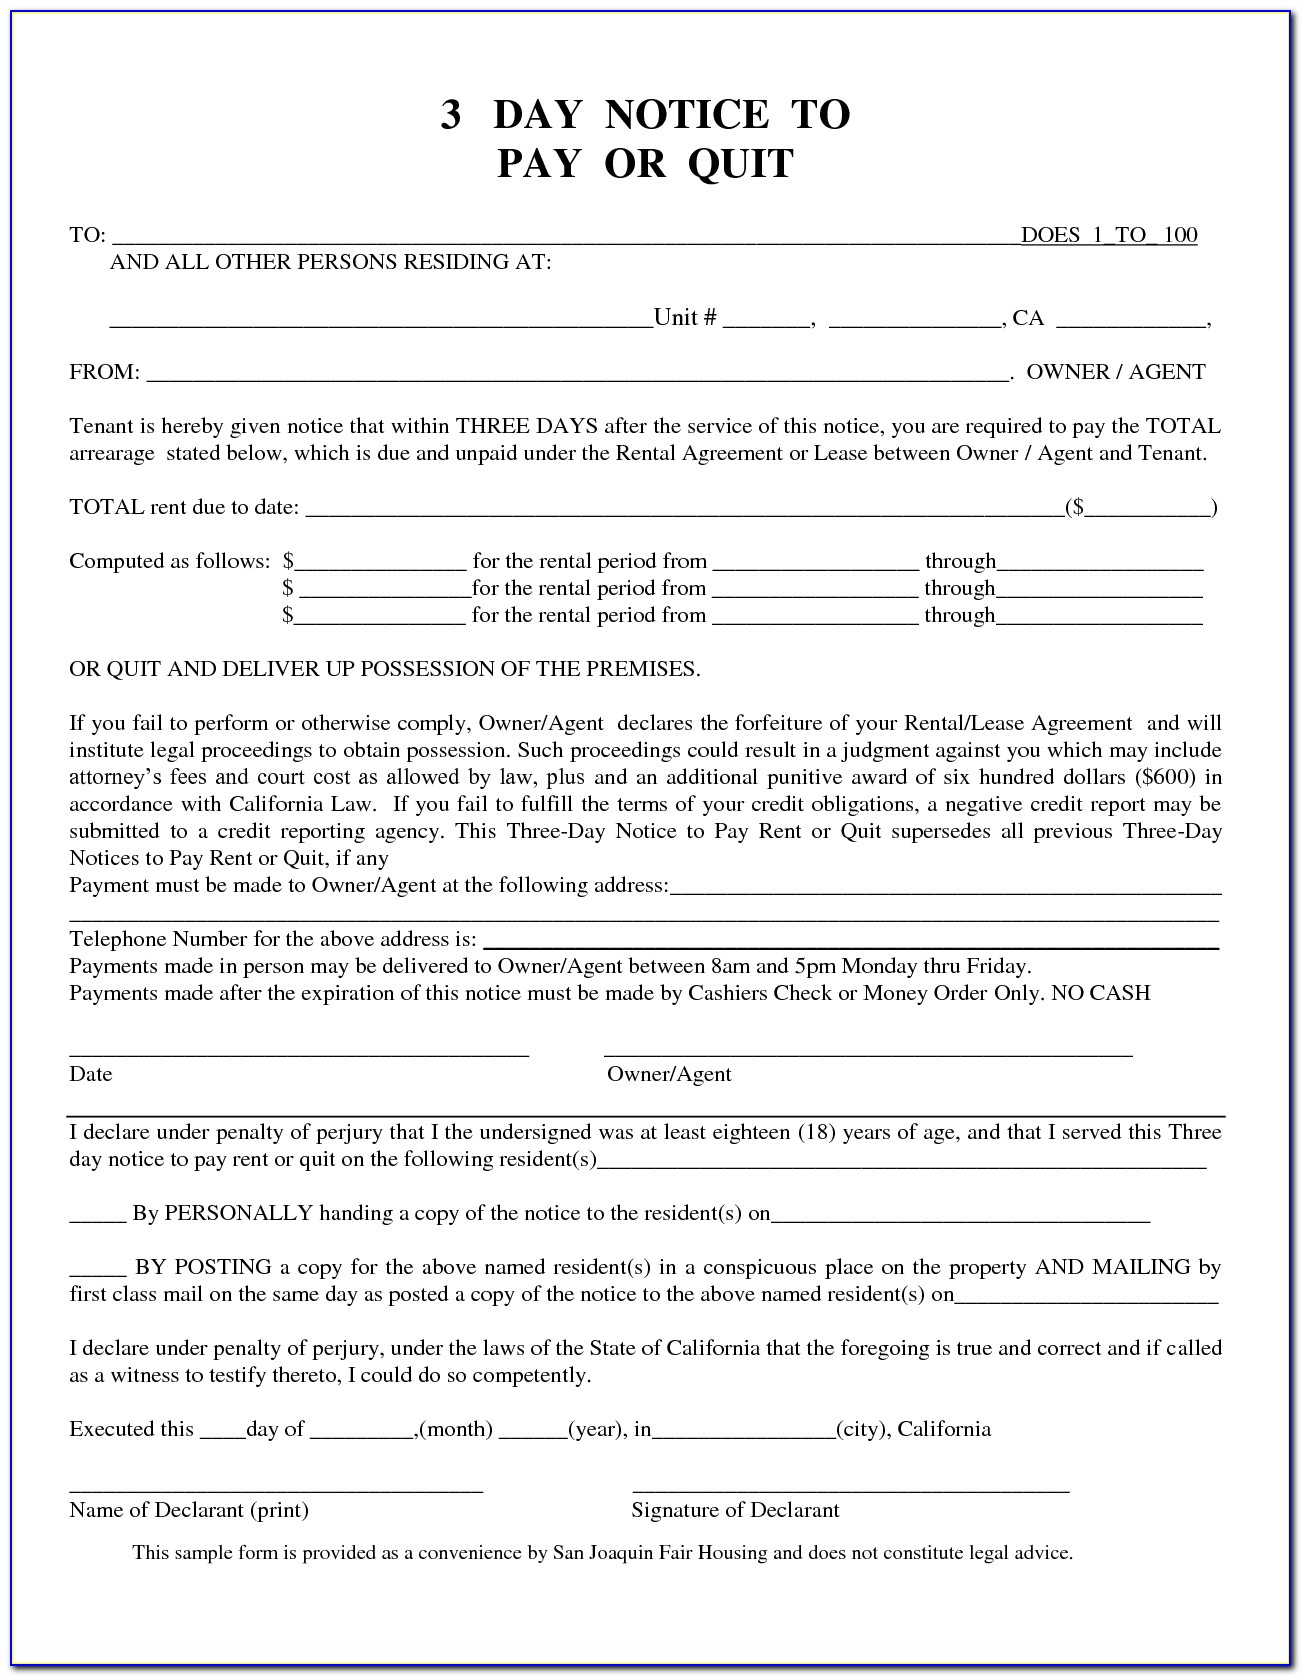 California 3 Day Notice To Pay Rent Or Quit Form